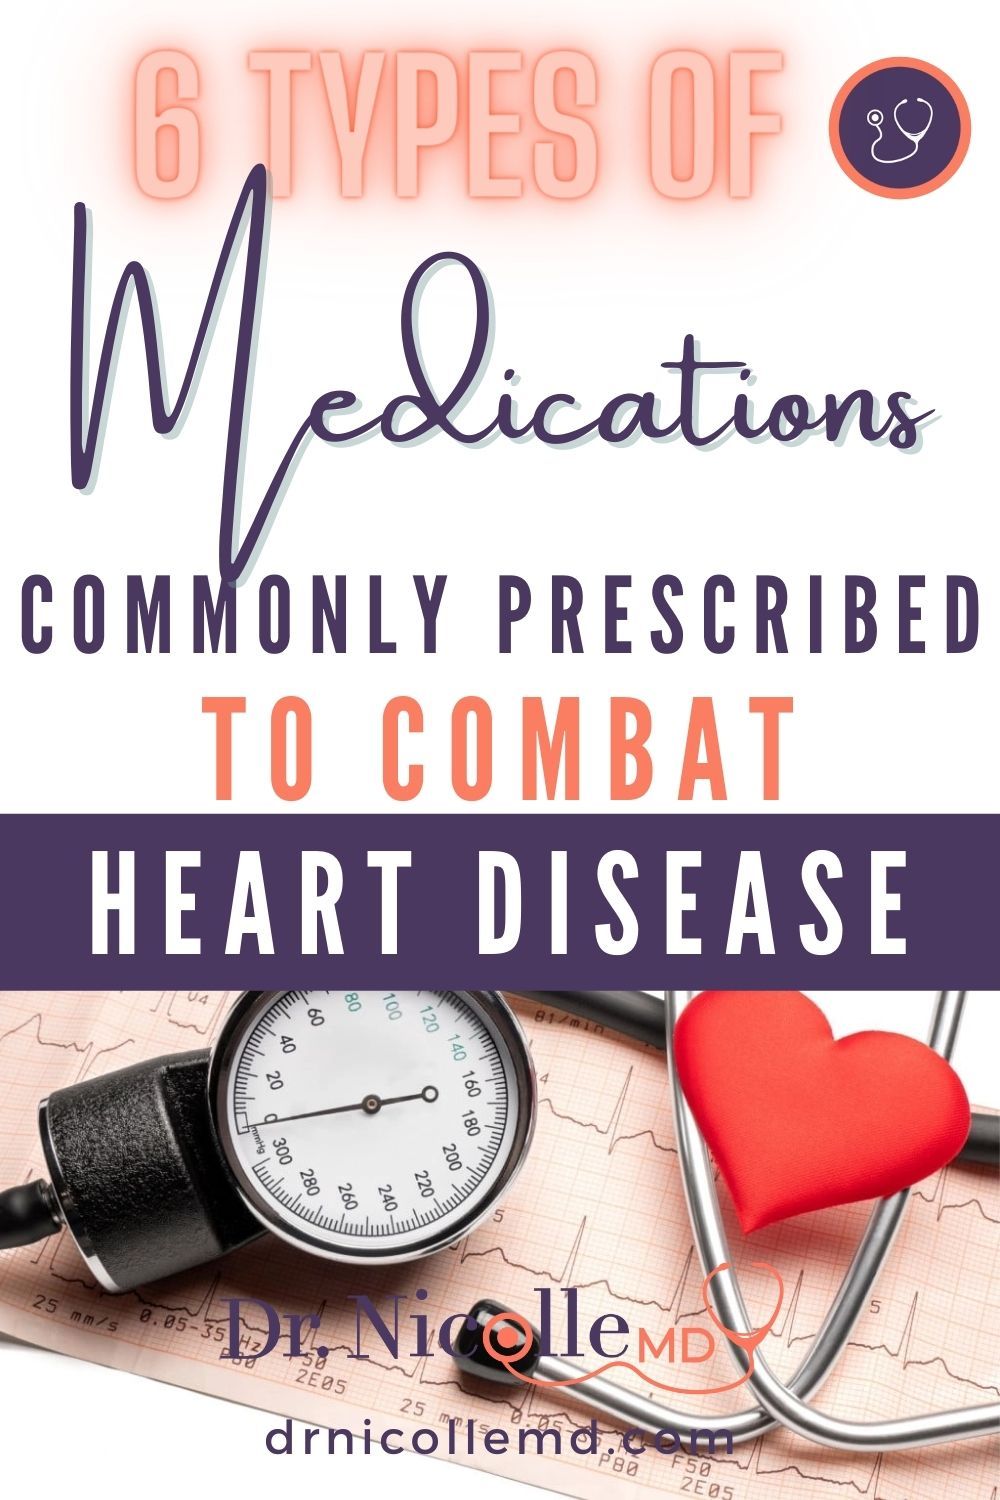 6 Types of Medications Commonly Prescribed To Combat Heart Disease